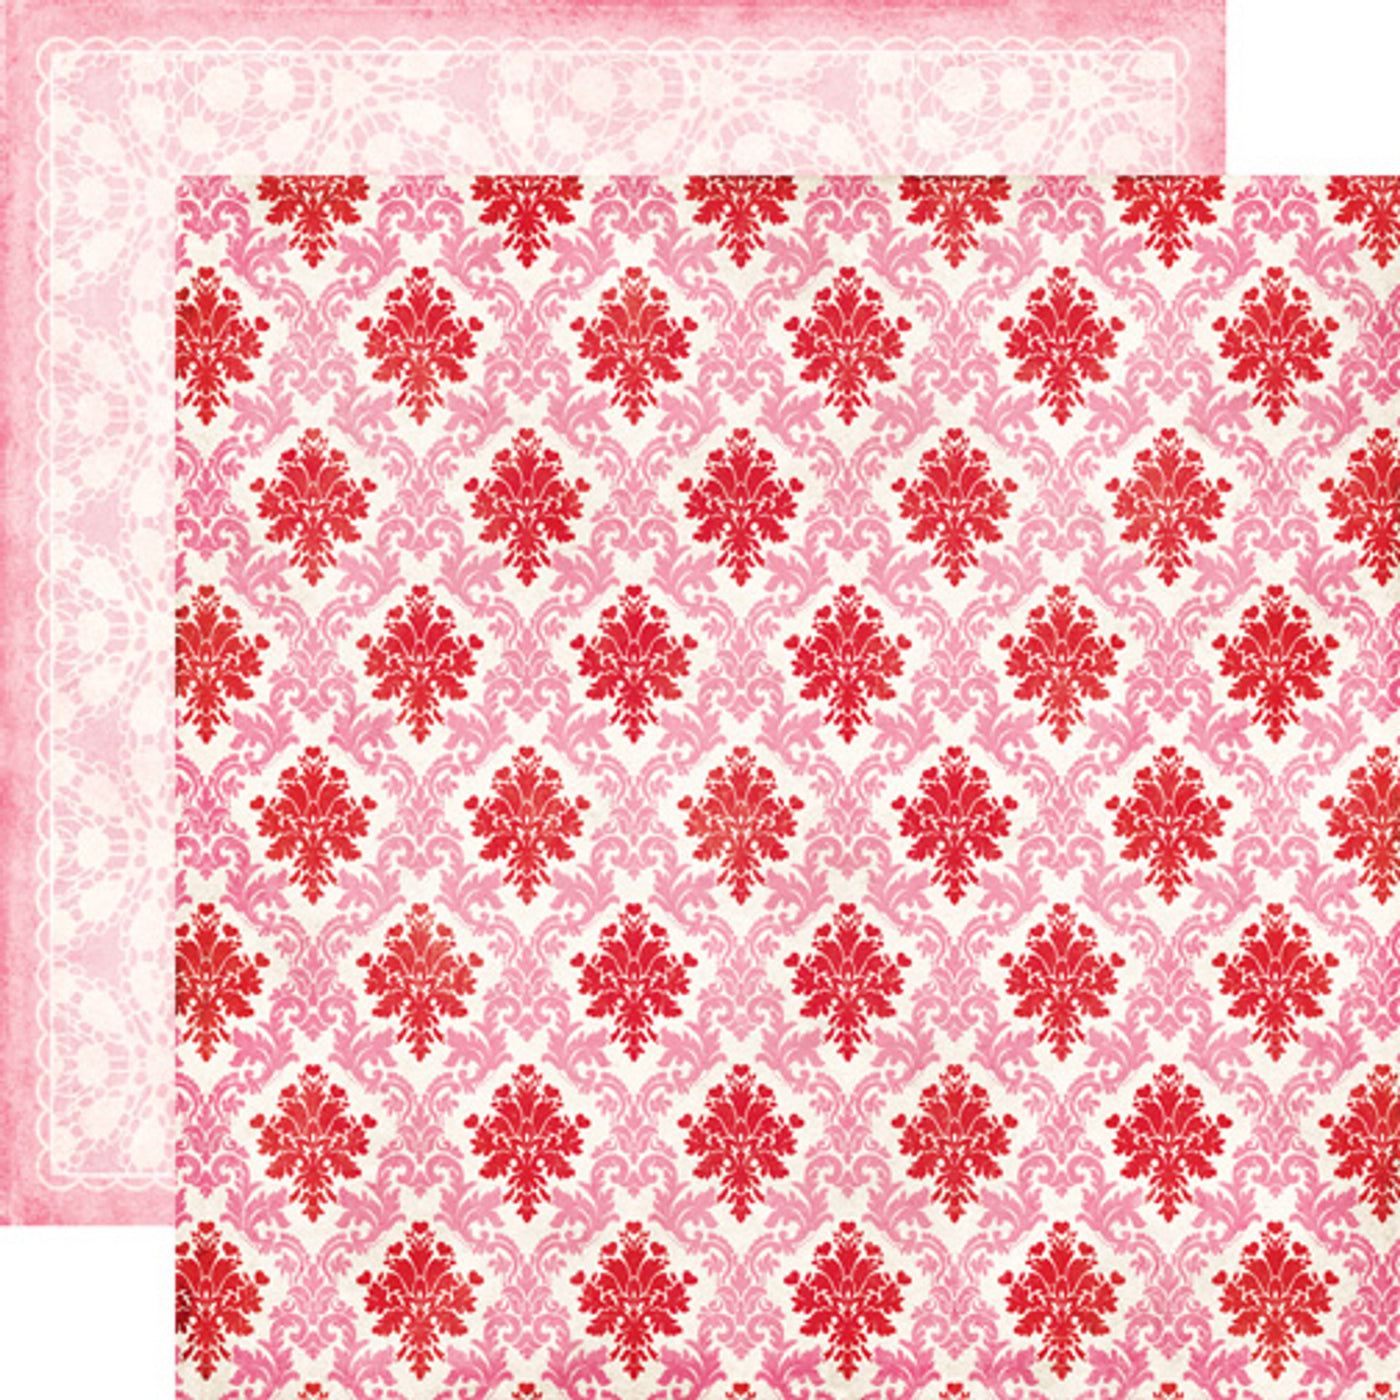 12x12 double-sided patterned paper. (Side A - pink and red damask pattern on a white background; Side B - fancy pink and white lace pattern with a pink border) Archival quality.